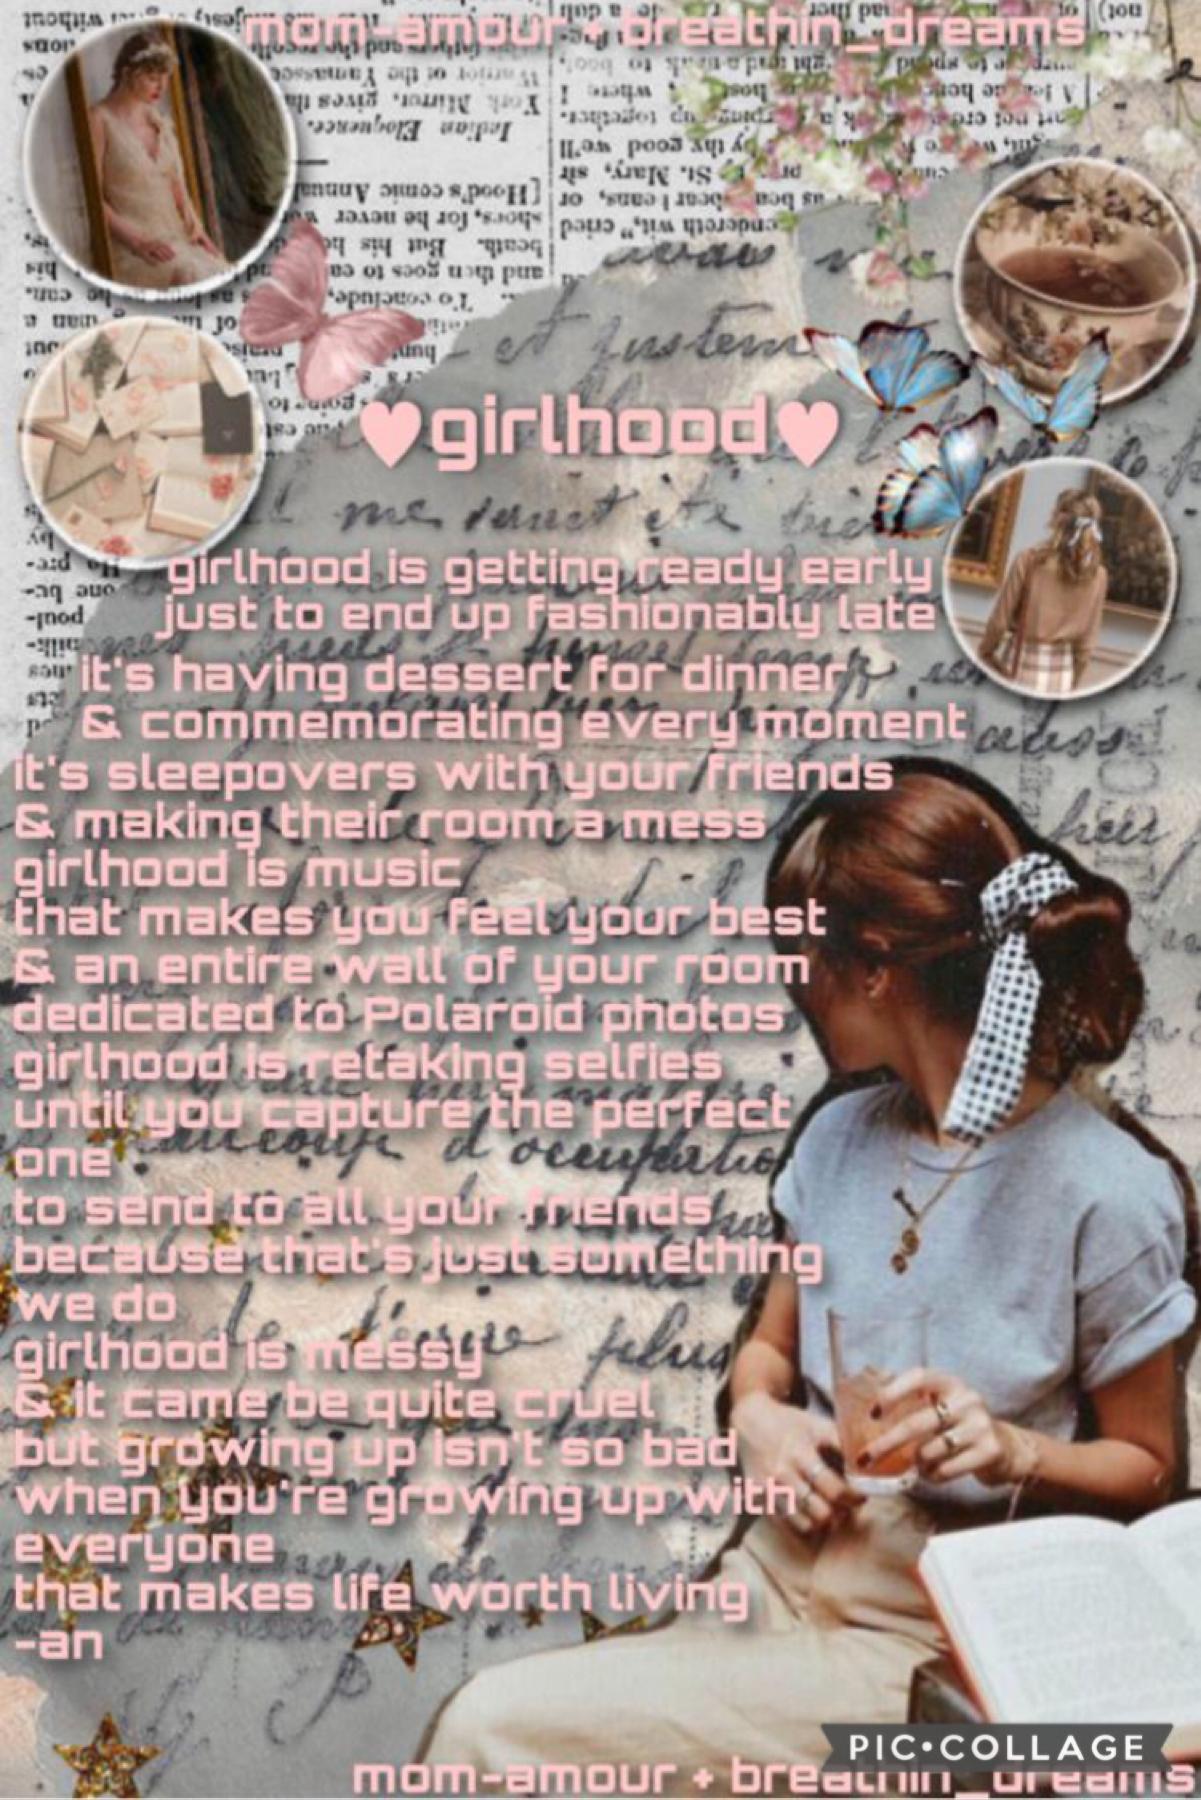 16.03.24 Light academia poetry aesthetic collage collaboration with mon-amour.